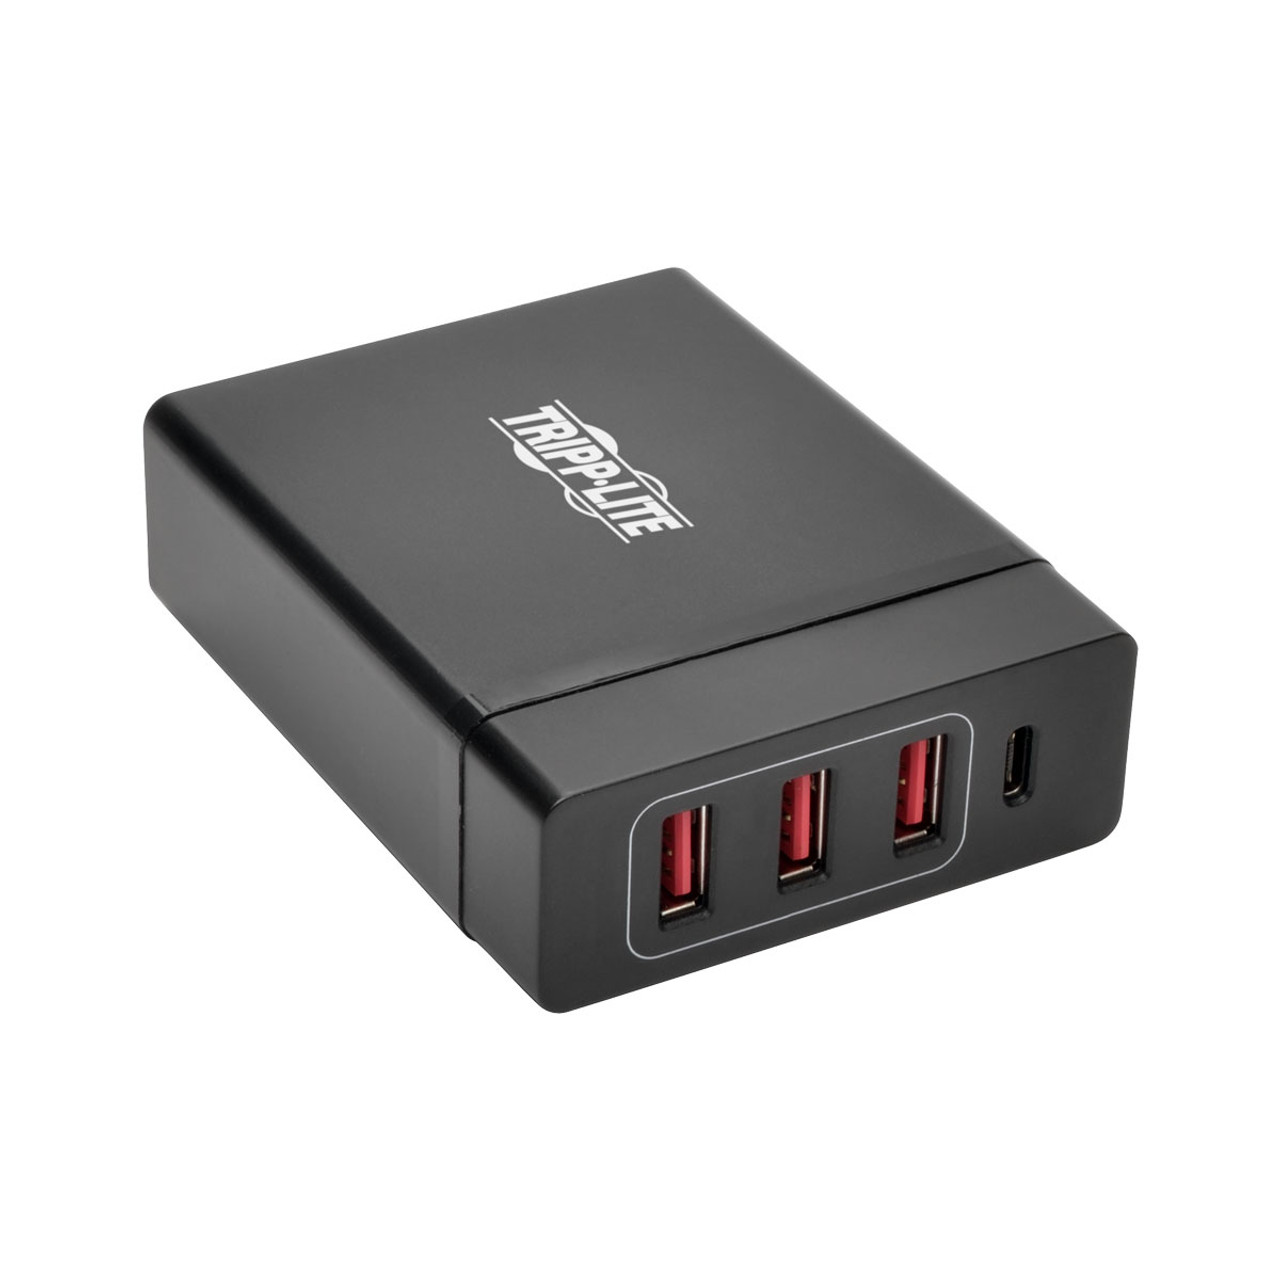 Tripp Lite U280-004-WS3C1 Indoor Black,Red mobile device charger